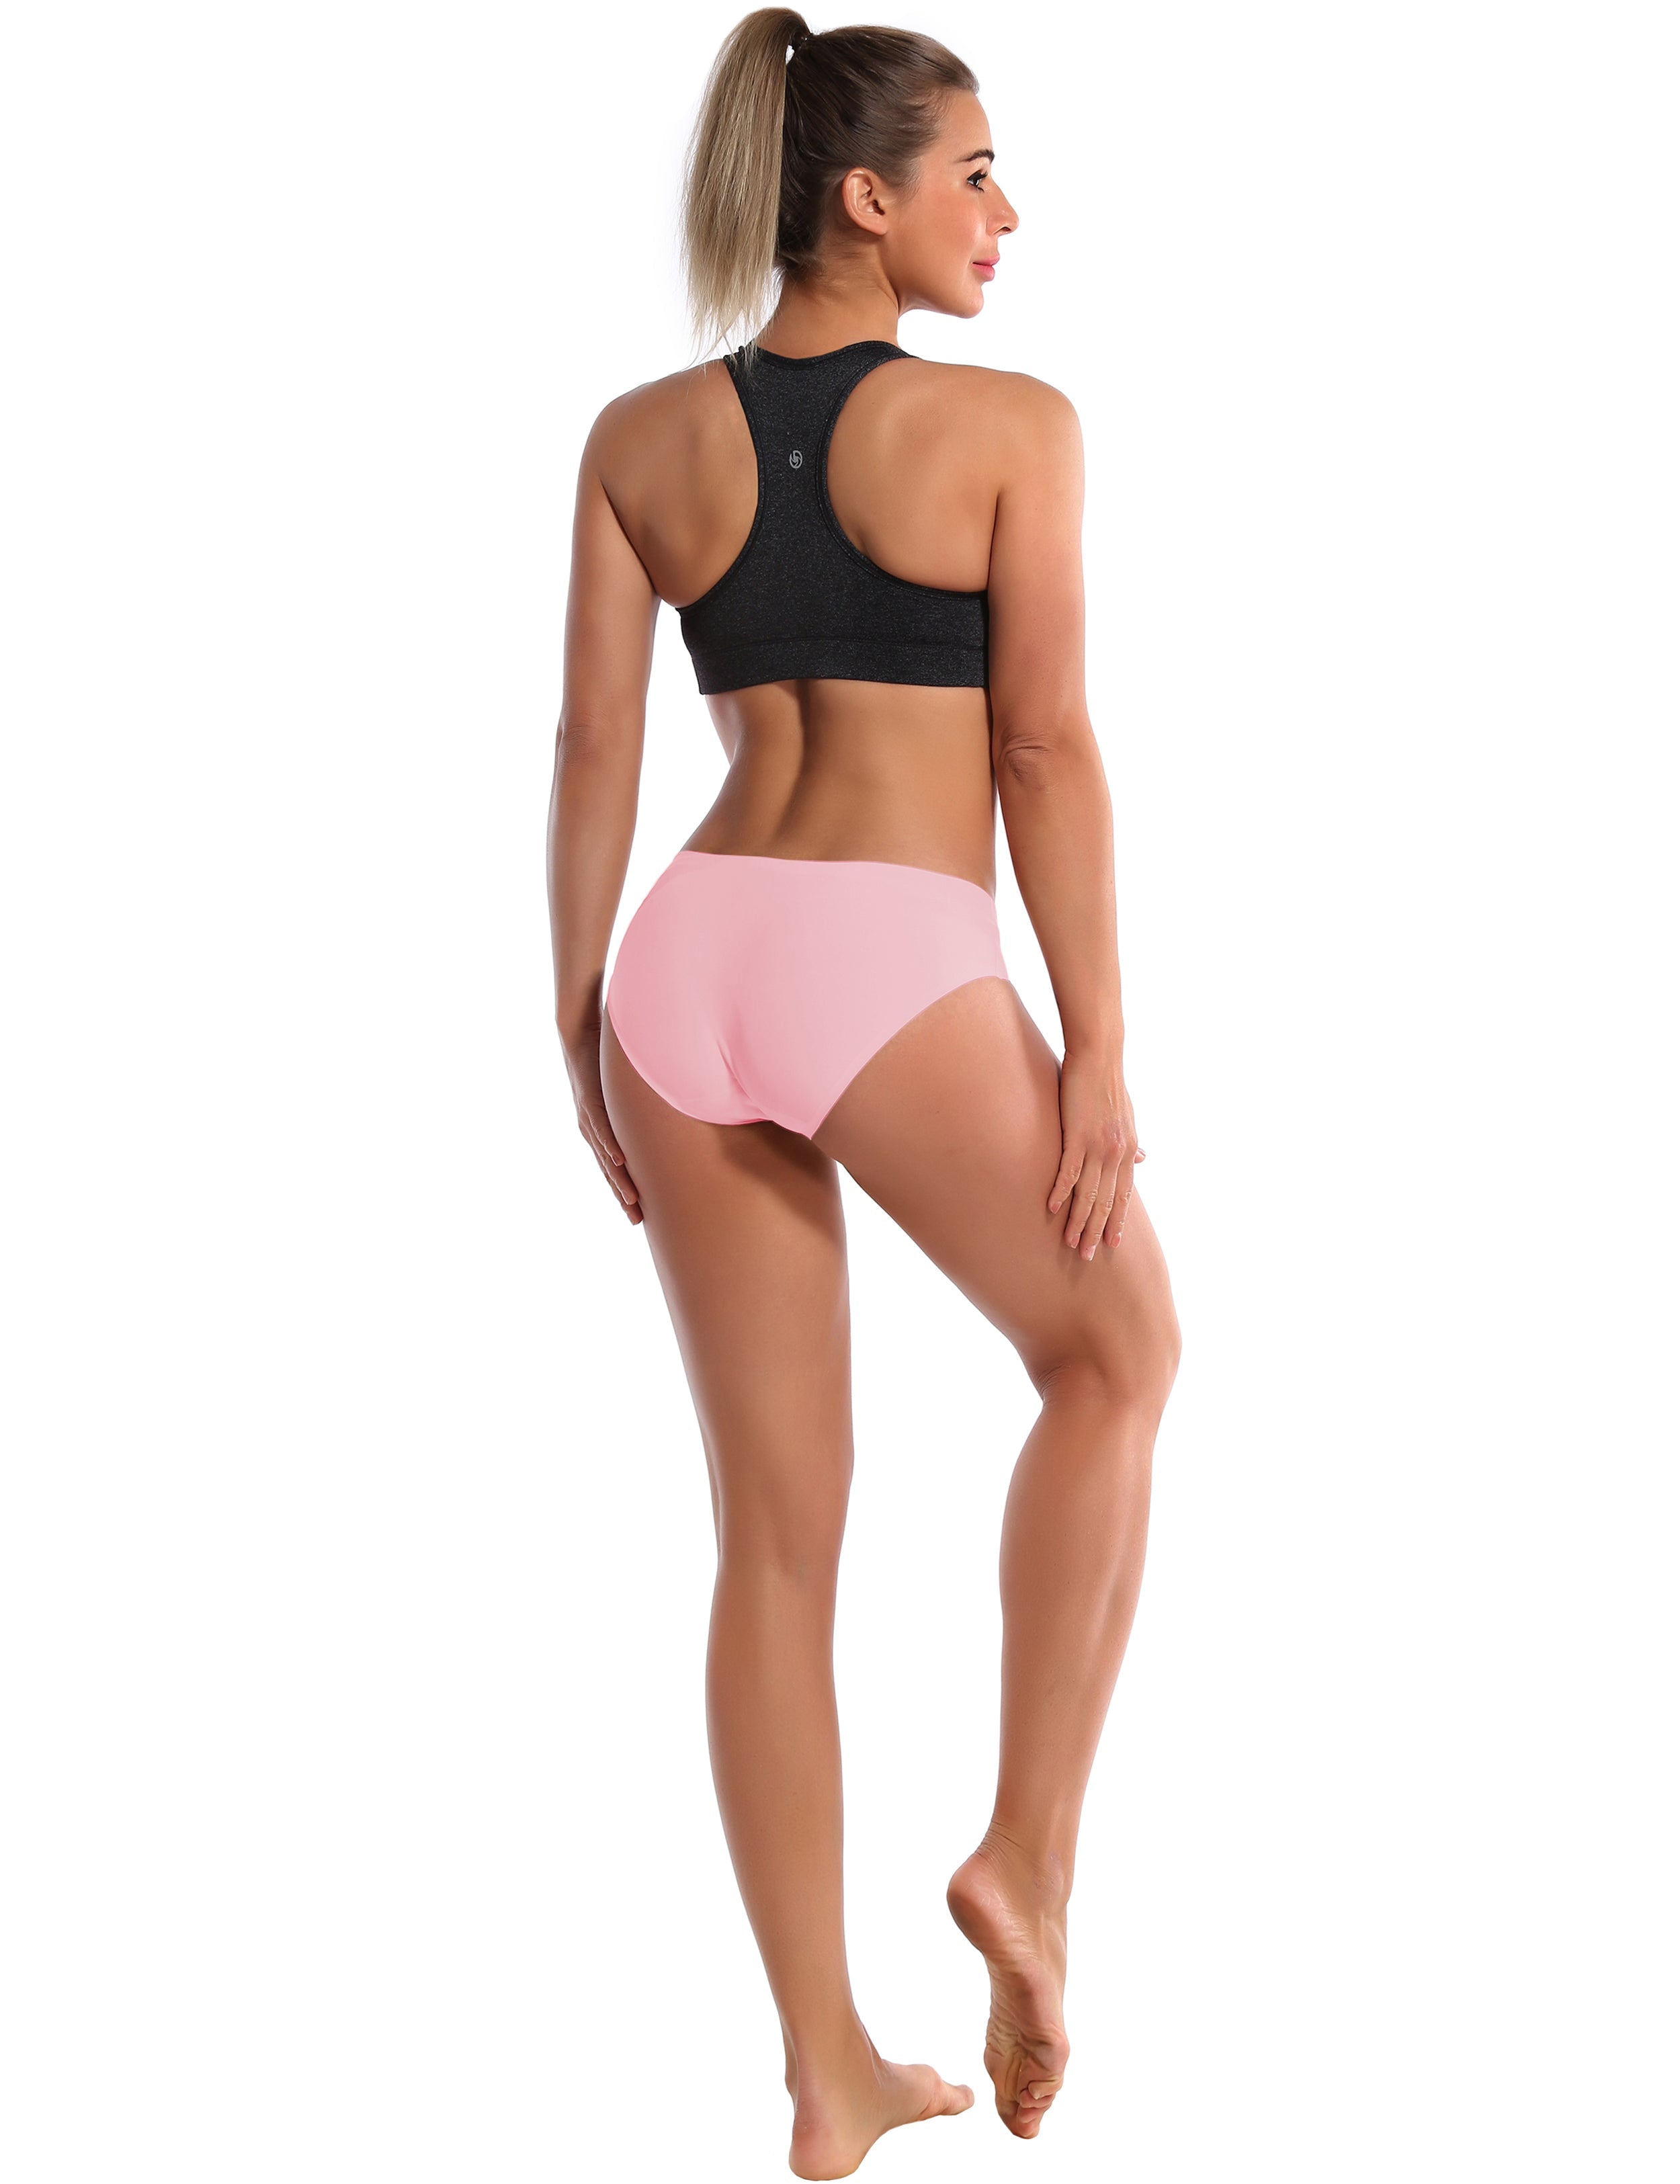 Invisibles Sport Bikini Panties indipink Sleek, soft, smooth and totally comfortable: our newest bikini style is here. High elasticity High density Softest-ever fabric Laser cutting Unsealed Comfortable No panty lines Machine wash 95% Nylon, 5% Spandex